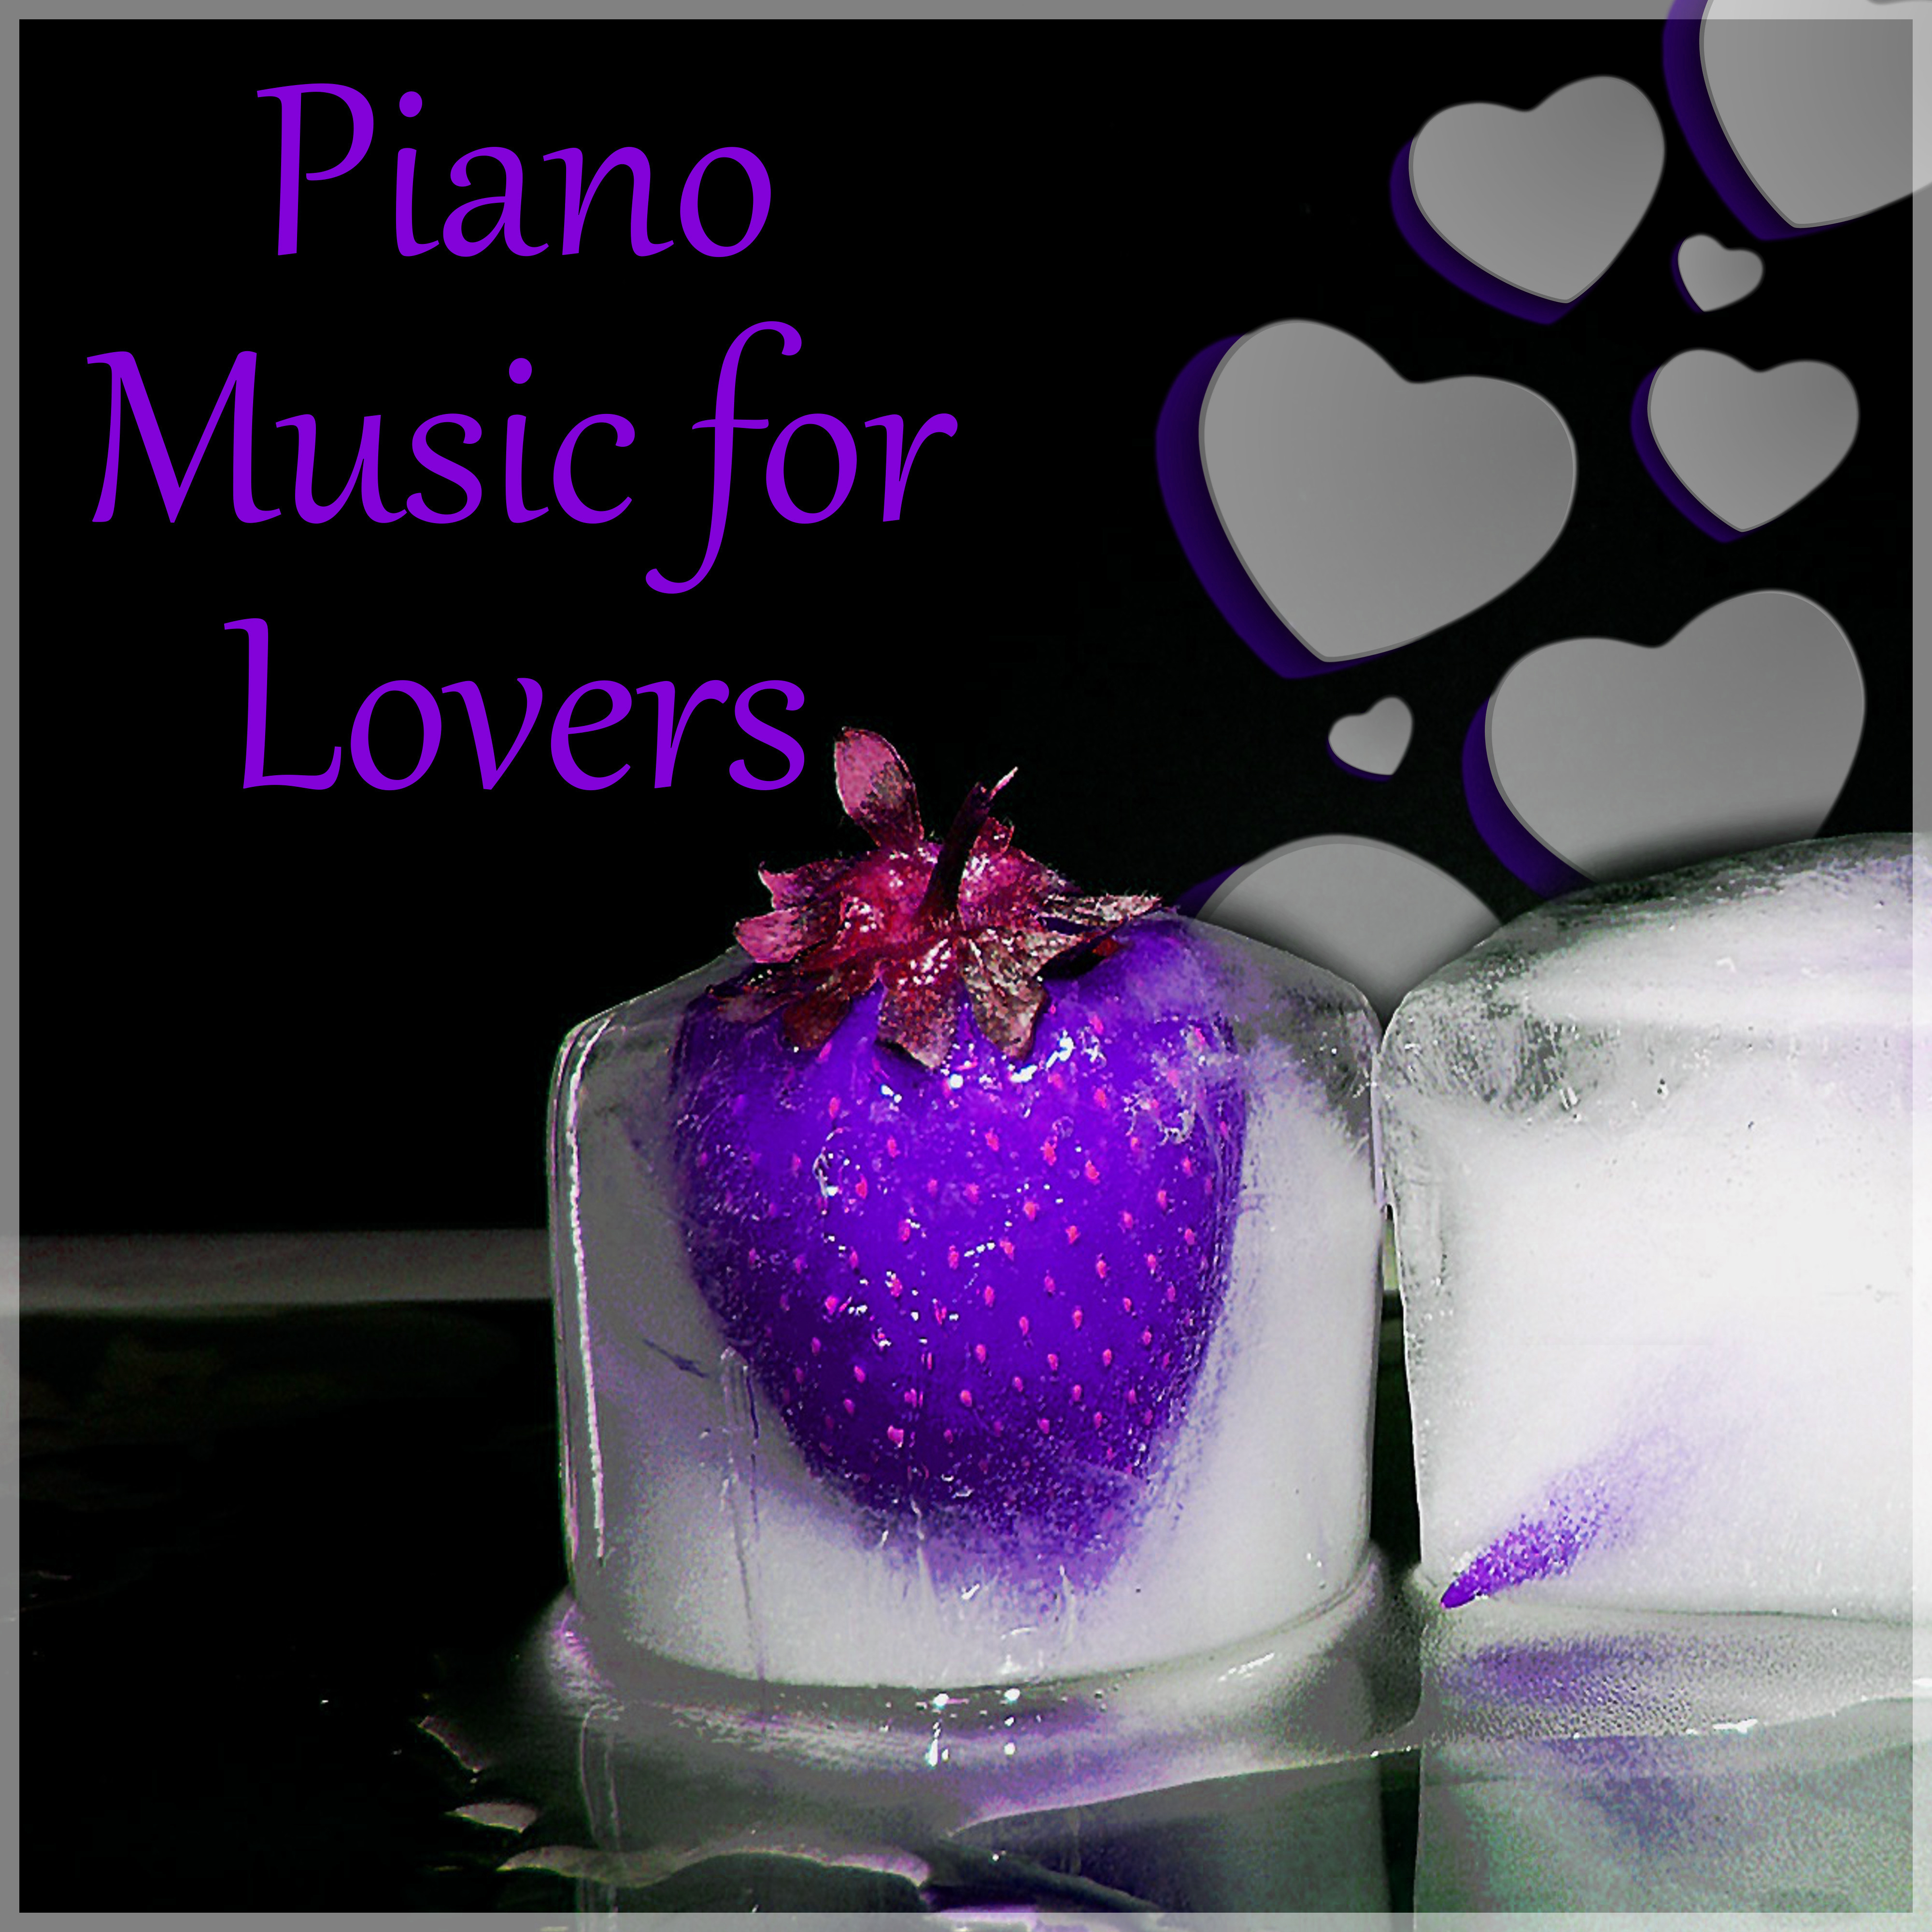 Piano Music for Lovers – Sensual Massage, Piano Jazz Music, Jazz Music, Smooth & **** Piano Music, Mellow Jazz After Dark, Romantic Jazz Sounds